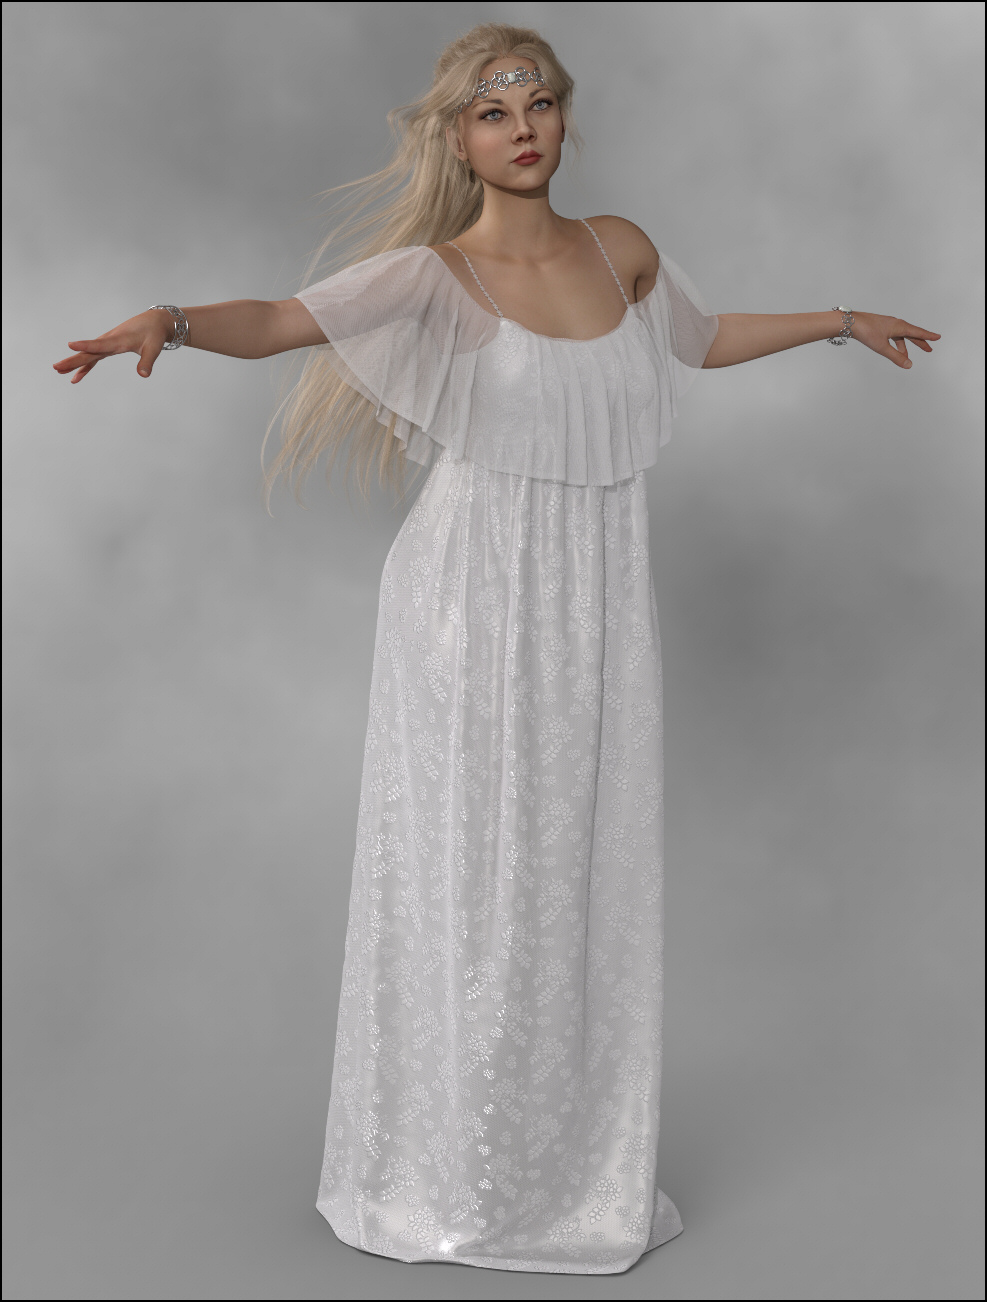 dForce -  Long Gypsy Dress for G8F by: Lully, 3D Models by Daz 3D